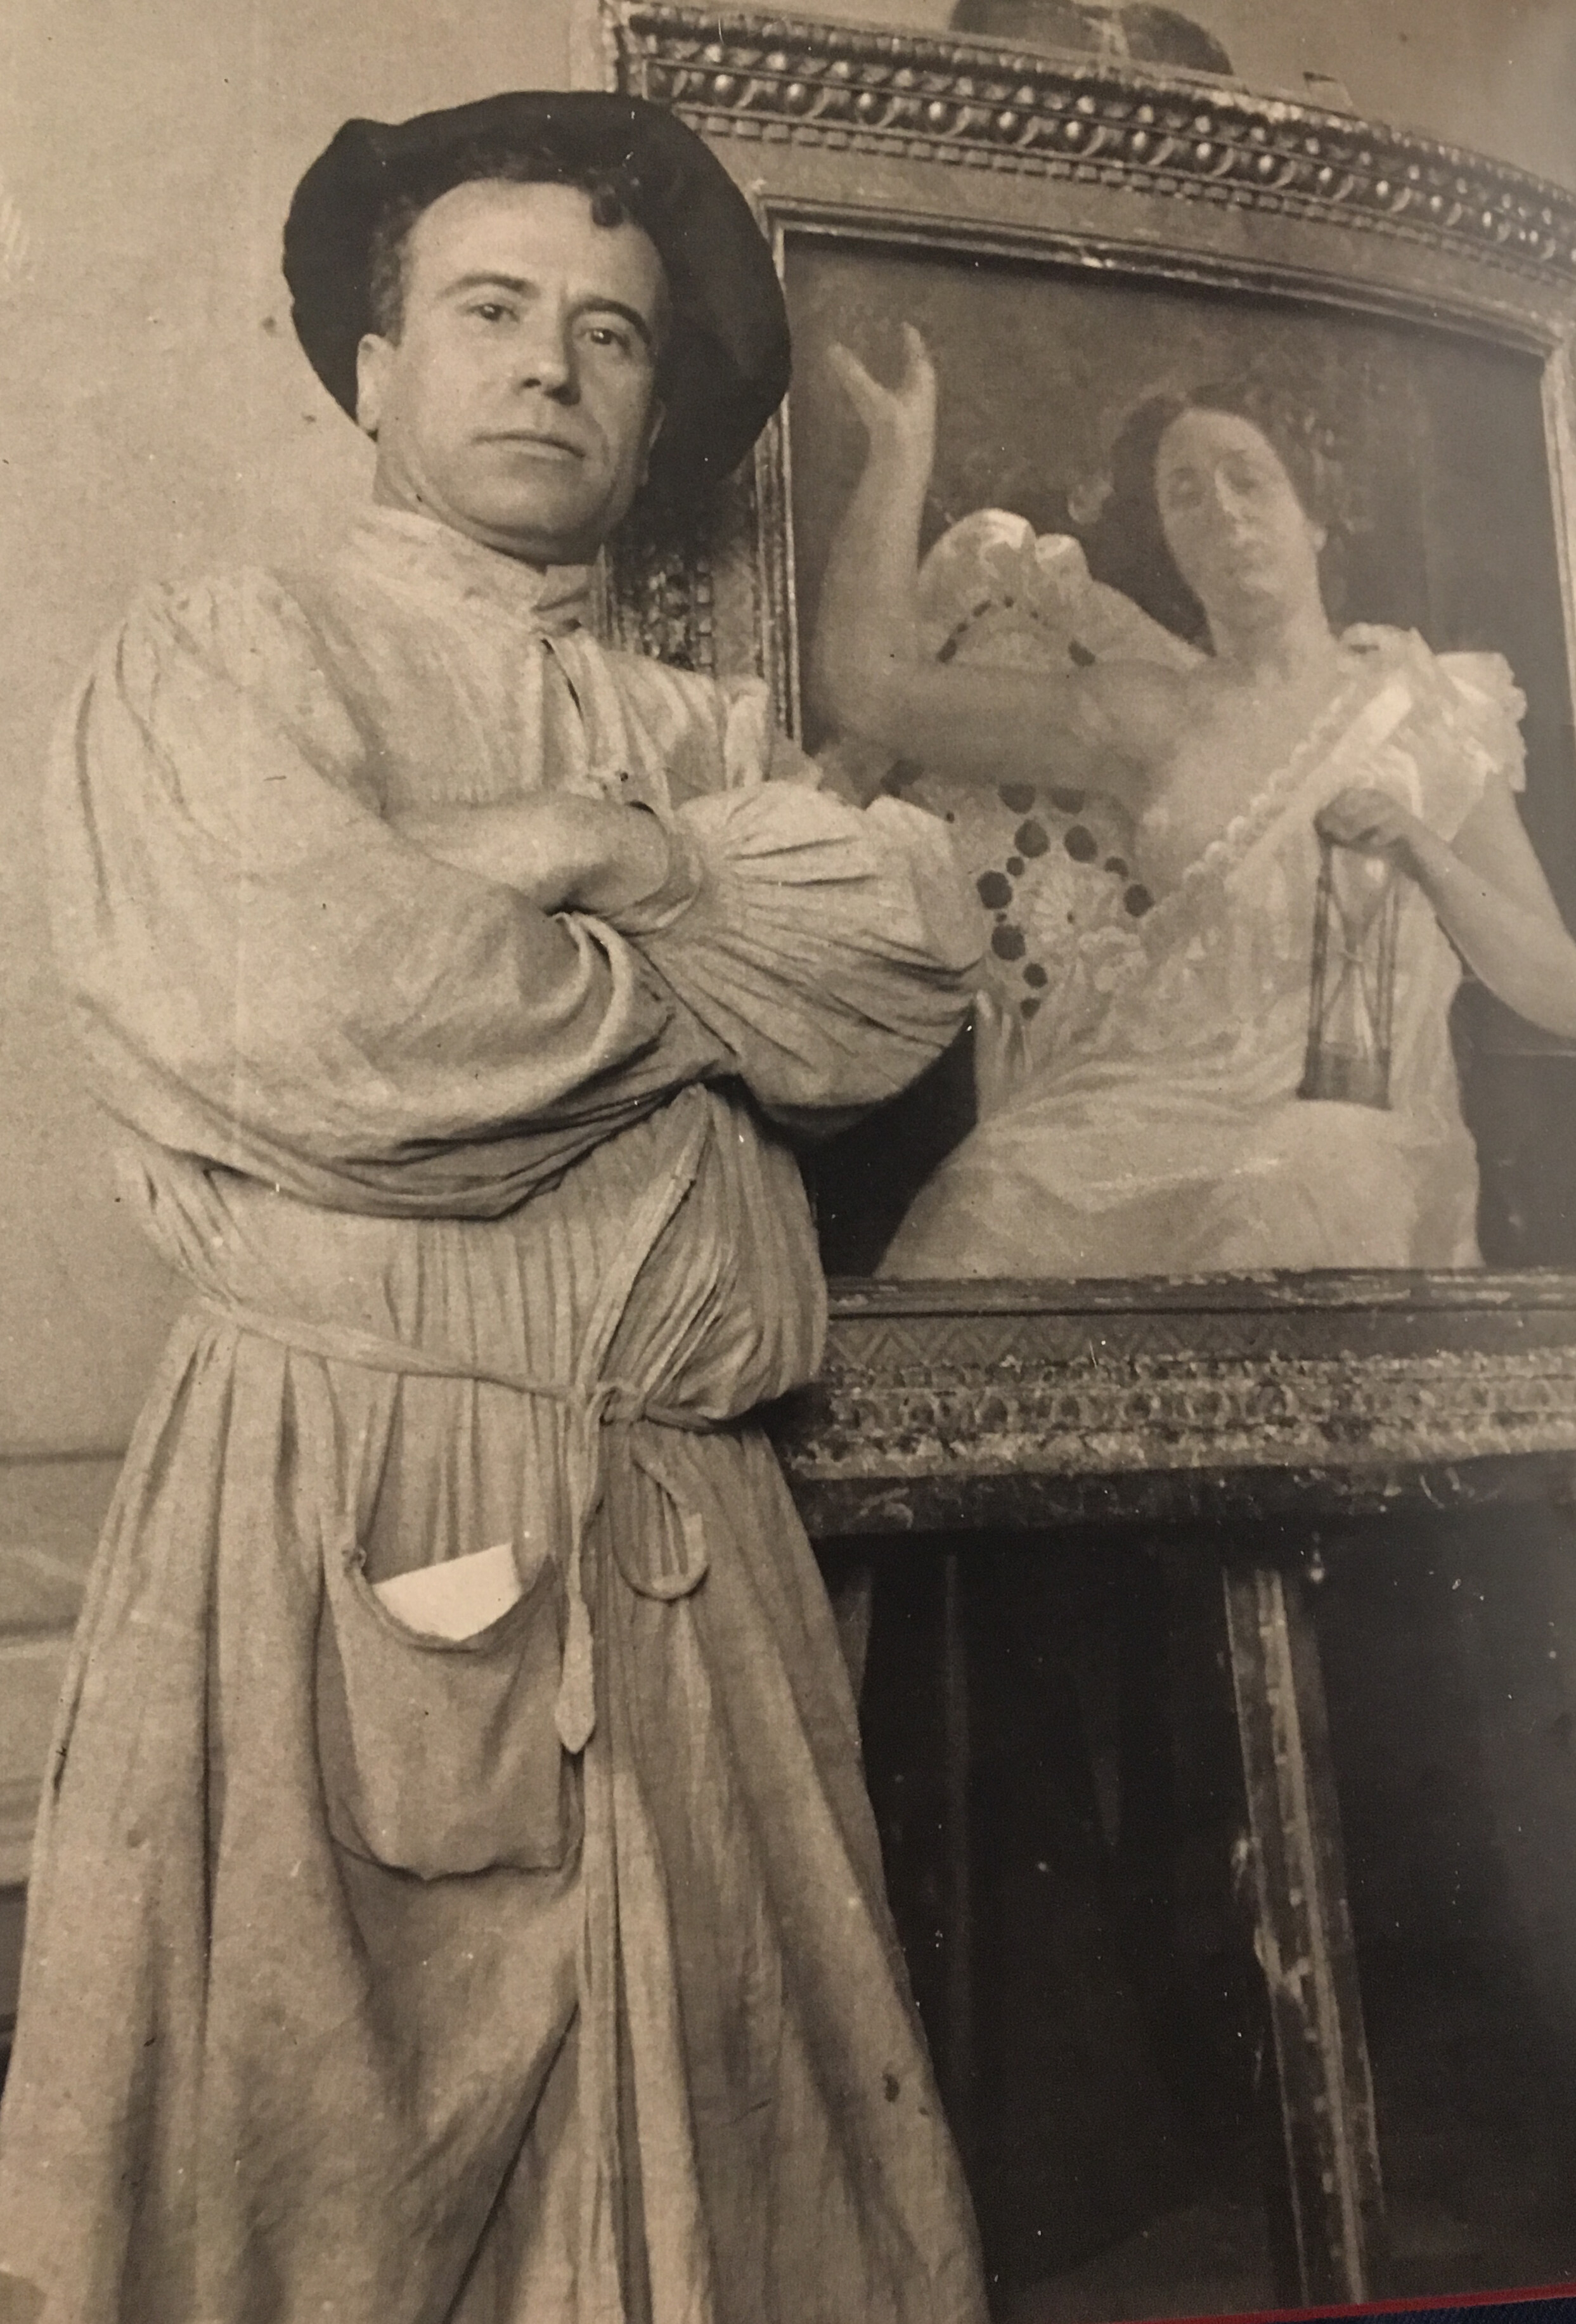 Photograph of Ilicio Joni, posing with his arms folded in front of a painting on an easel